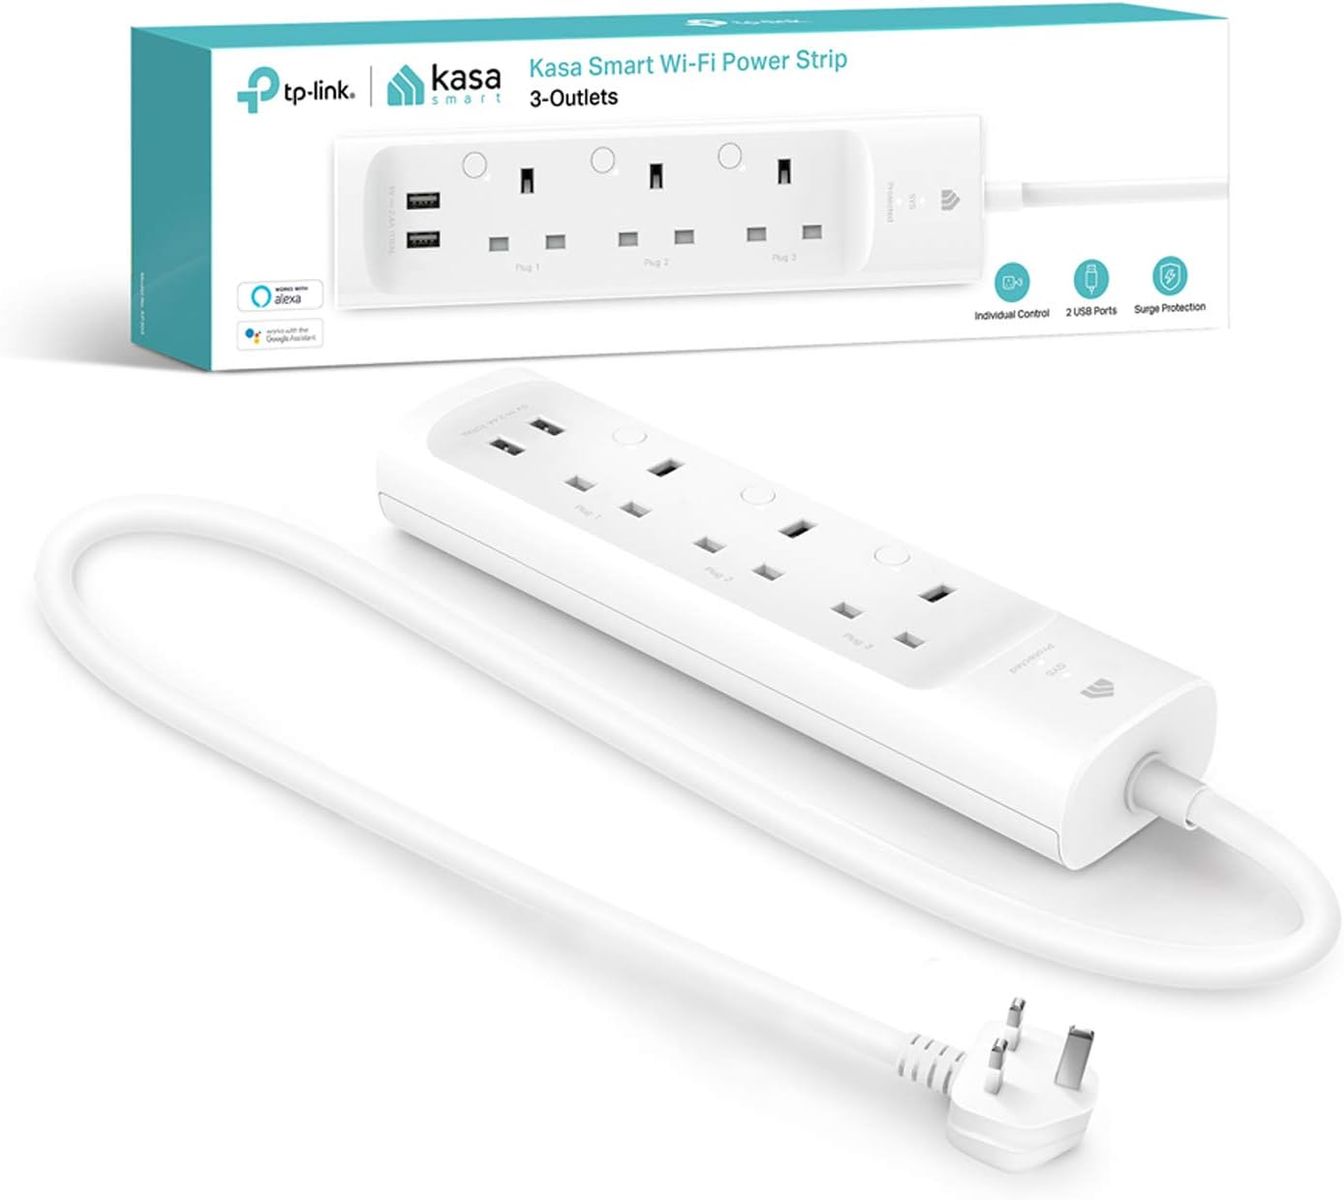 TP-Link Kasa Smart Wi-Fi Power Strip 3 Outlets 2 USB Ports App & Voice control works with Alexa & Google no hub required White v1.0